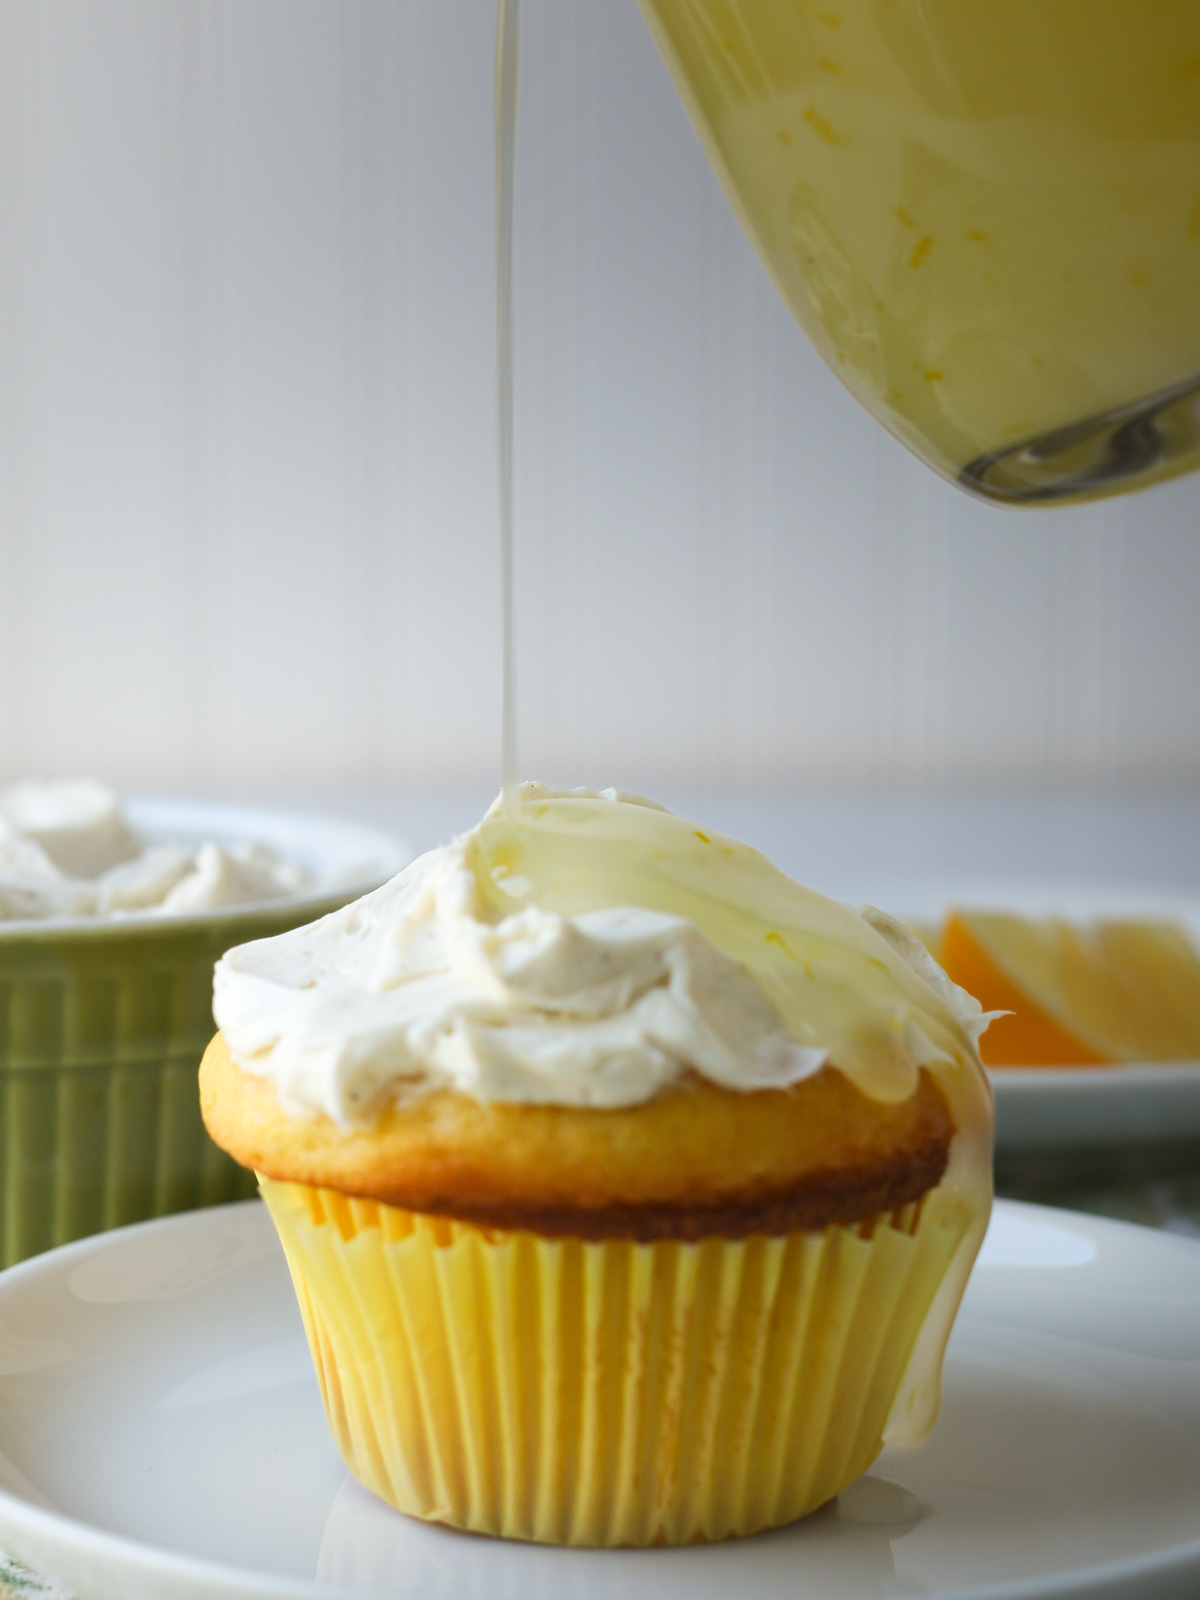 pouring lemon sauce over a cupcake topped with sweet cream cheese.